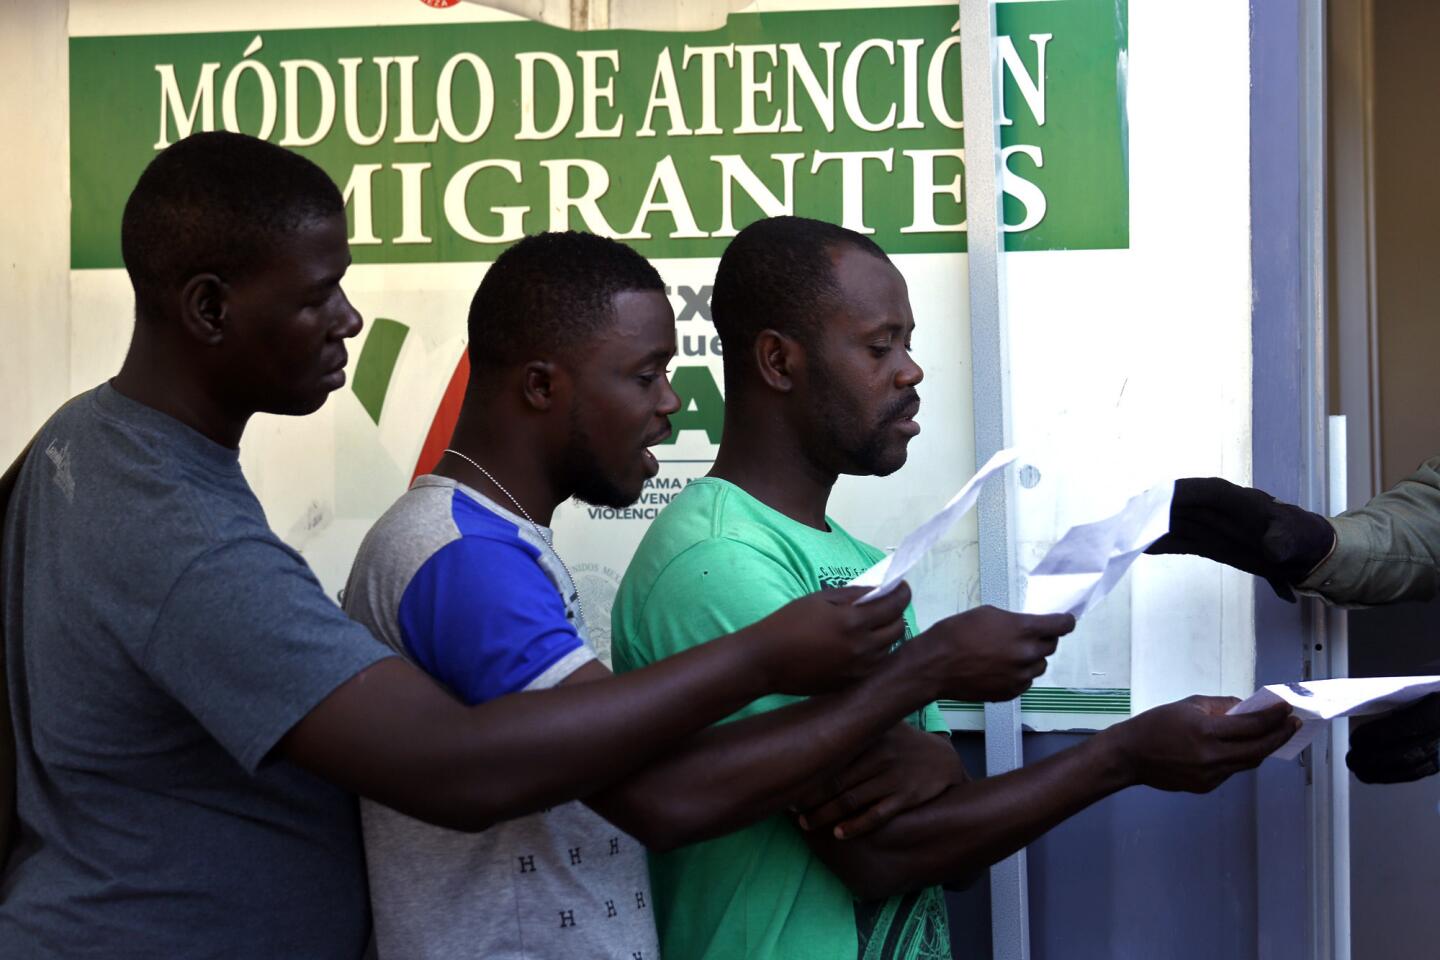 Haitian migrants hand their paperwork to a Mexican official at a makeshift office set up near the U.S. border.